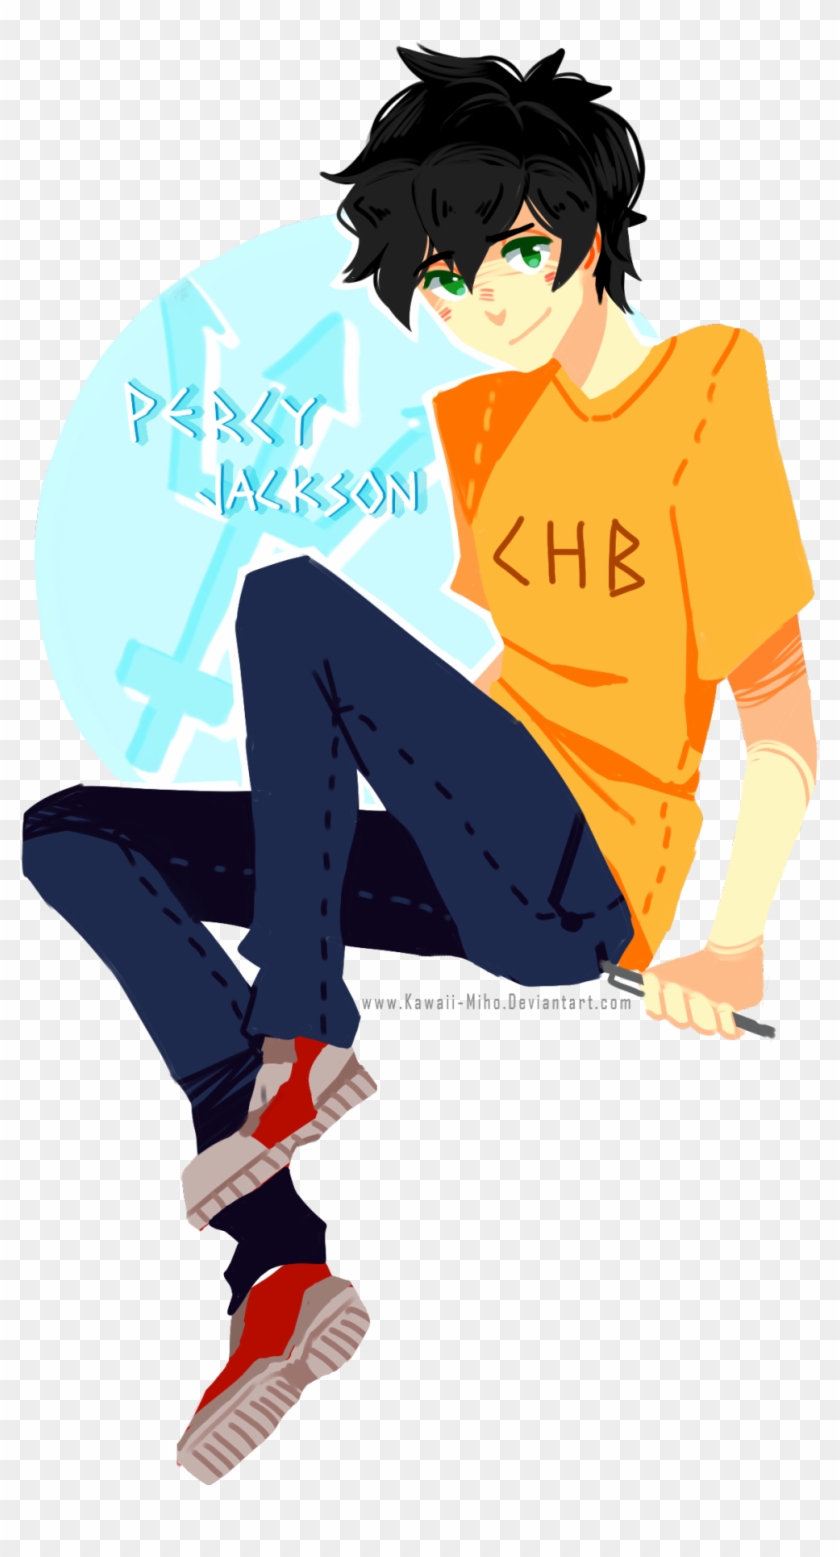 Percy Jackson png download - 800*800 - Free Transparent Camp